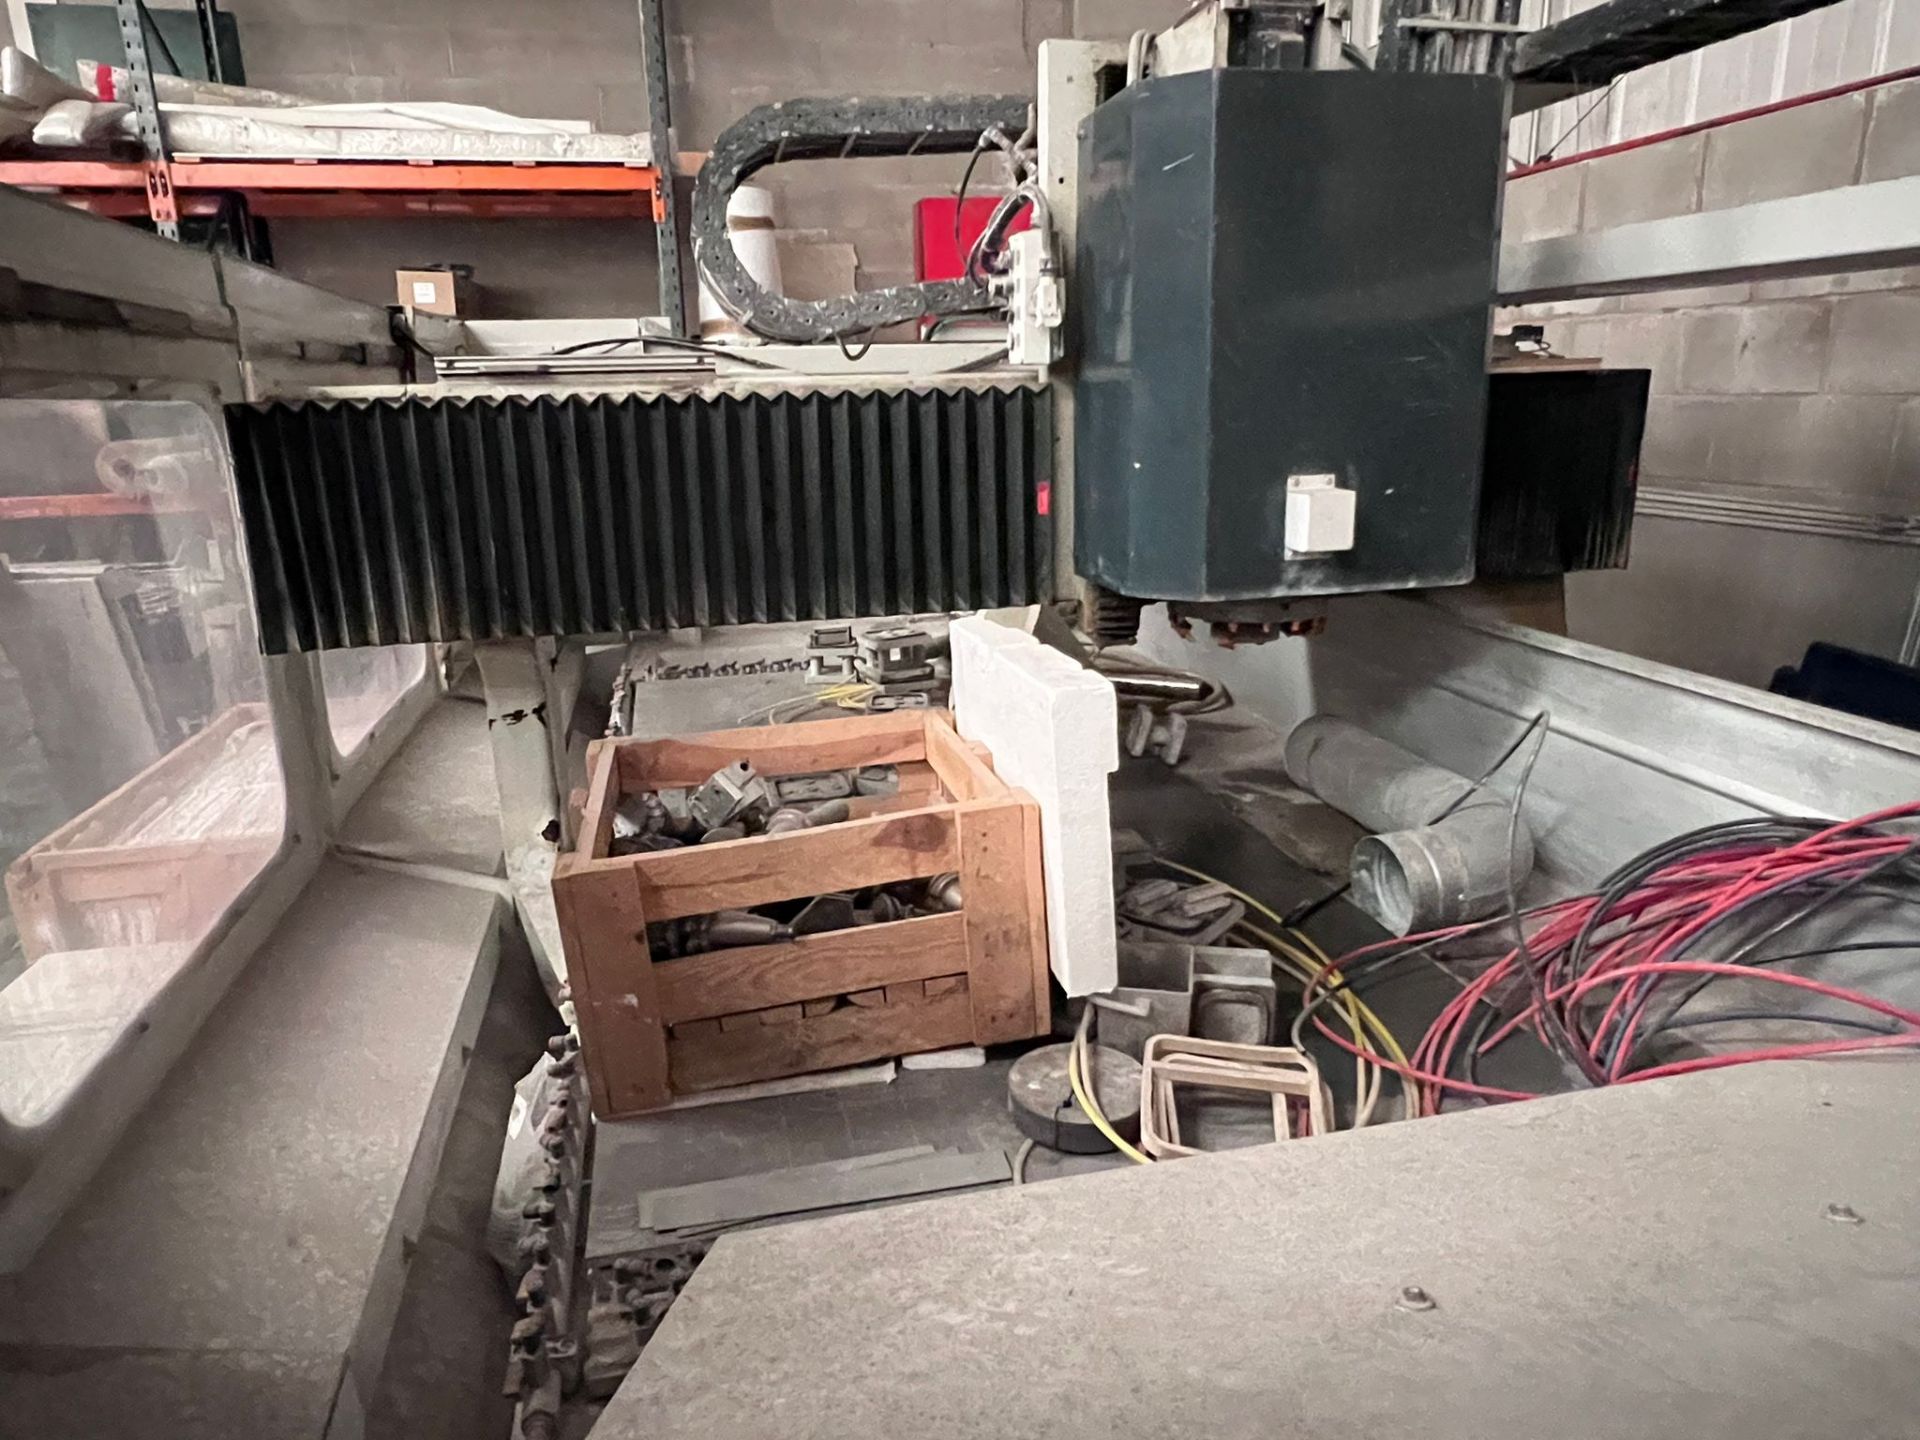 Intermac Compact Stone CNC Machine serial no. 90775 with a Broomwade Refrigerated Dryer, - Image 10 of 10